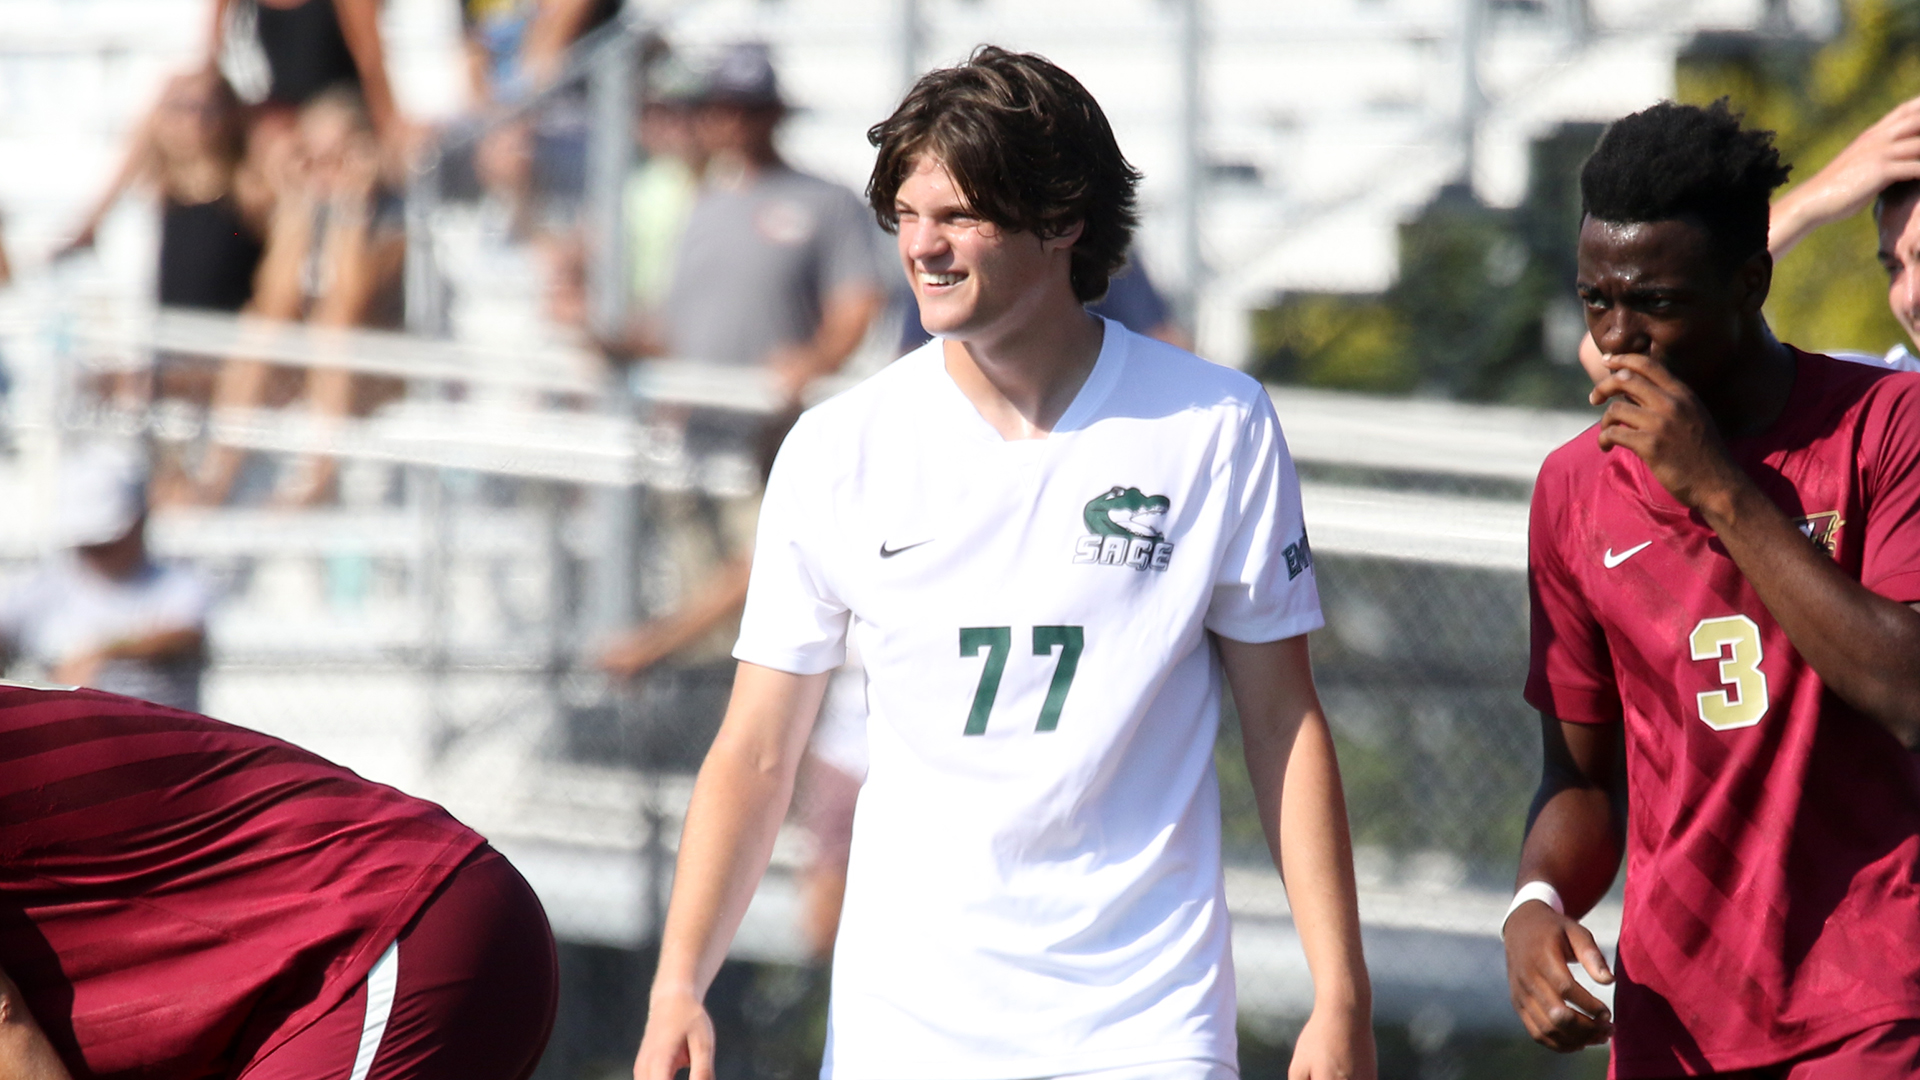 Late-game heroics by Martillotta lifts men's soccer past Westfield State, 3-2